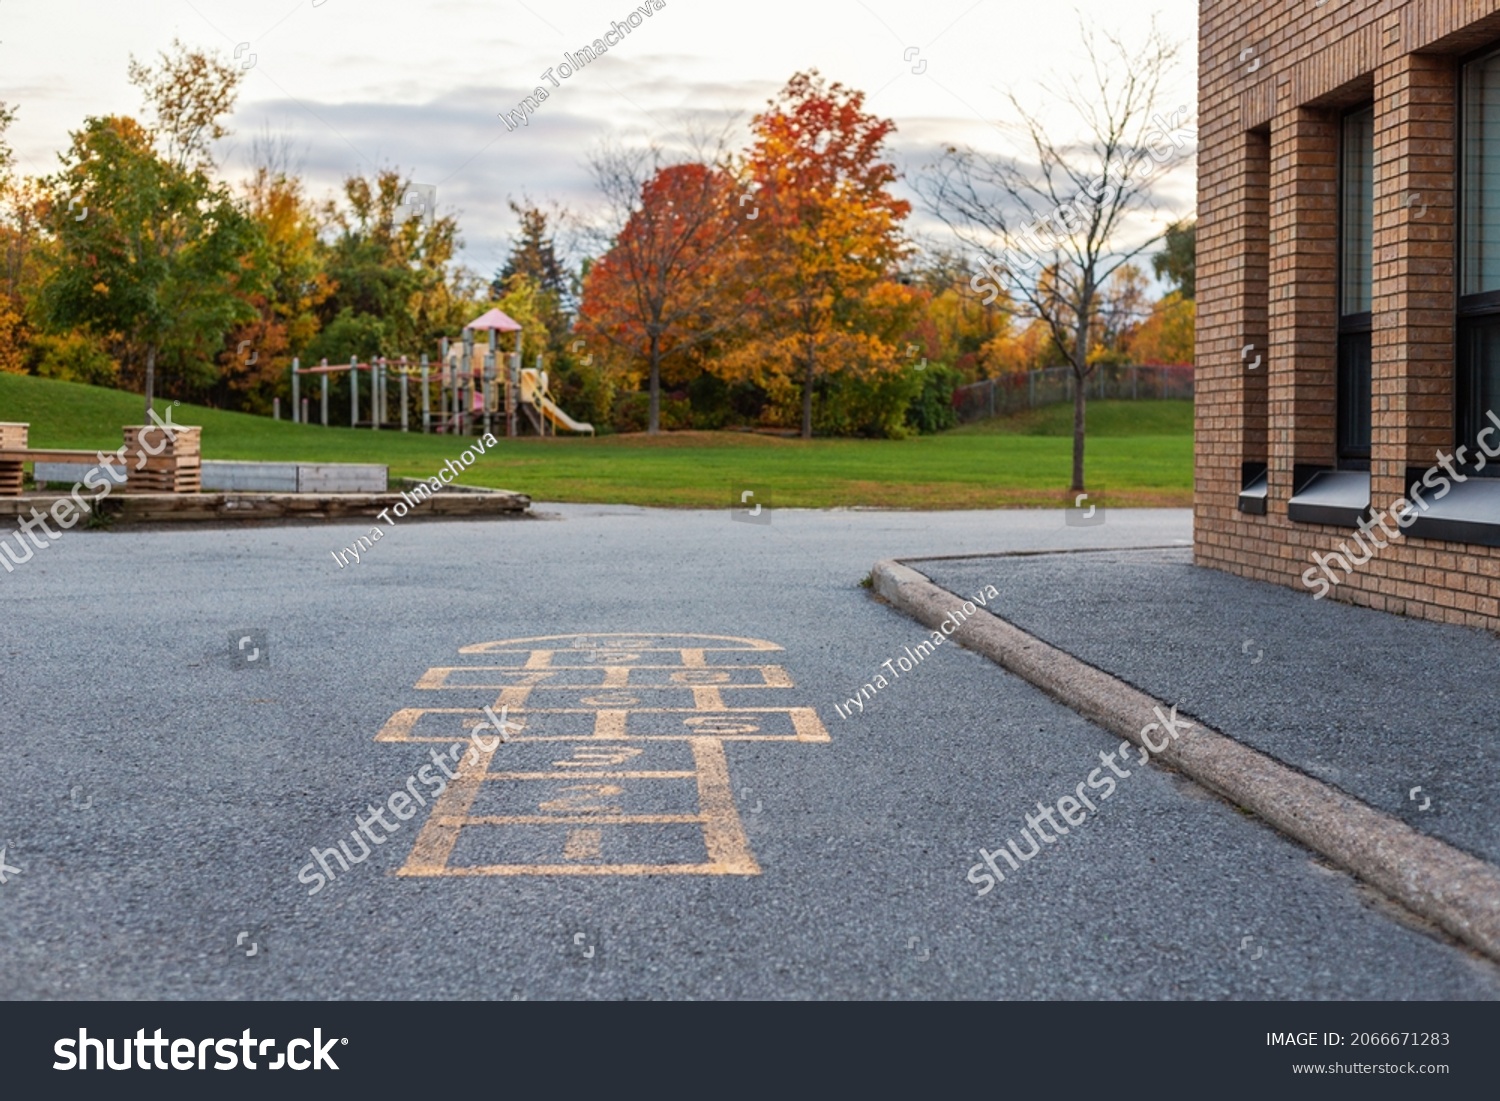 School building and schoolyard with playground for children in evening in fall season. Selective focus on hopscotch. Back to school educational concept #2066671283